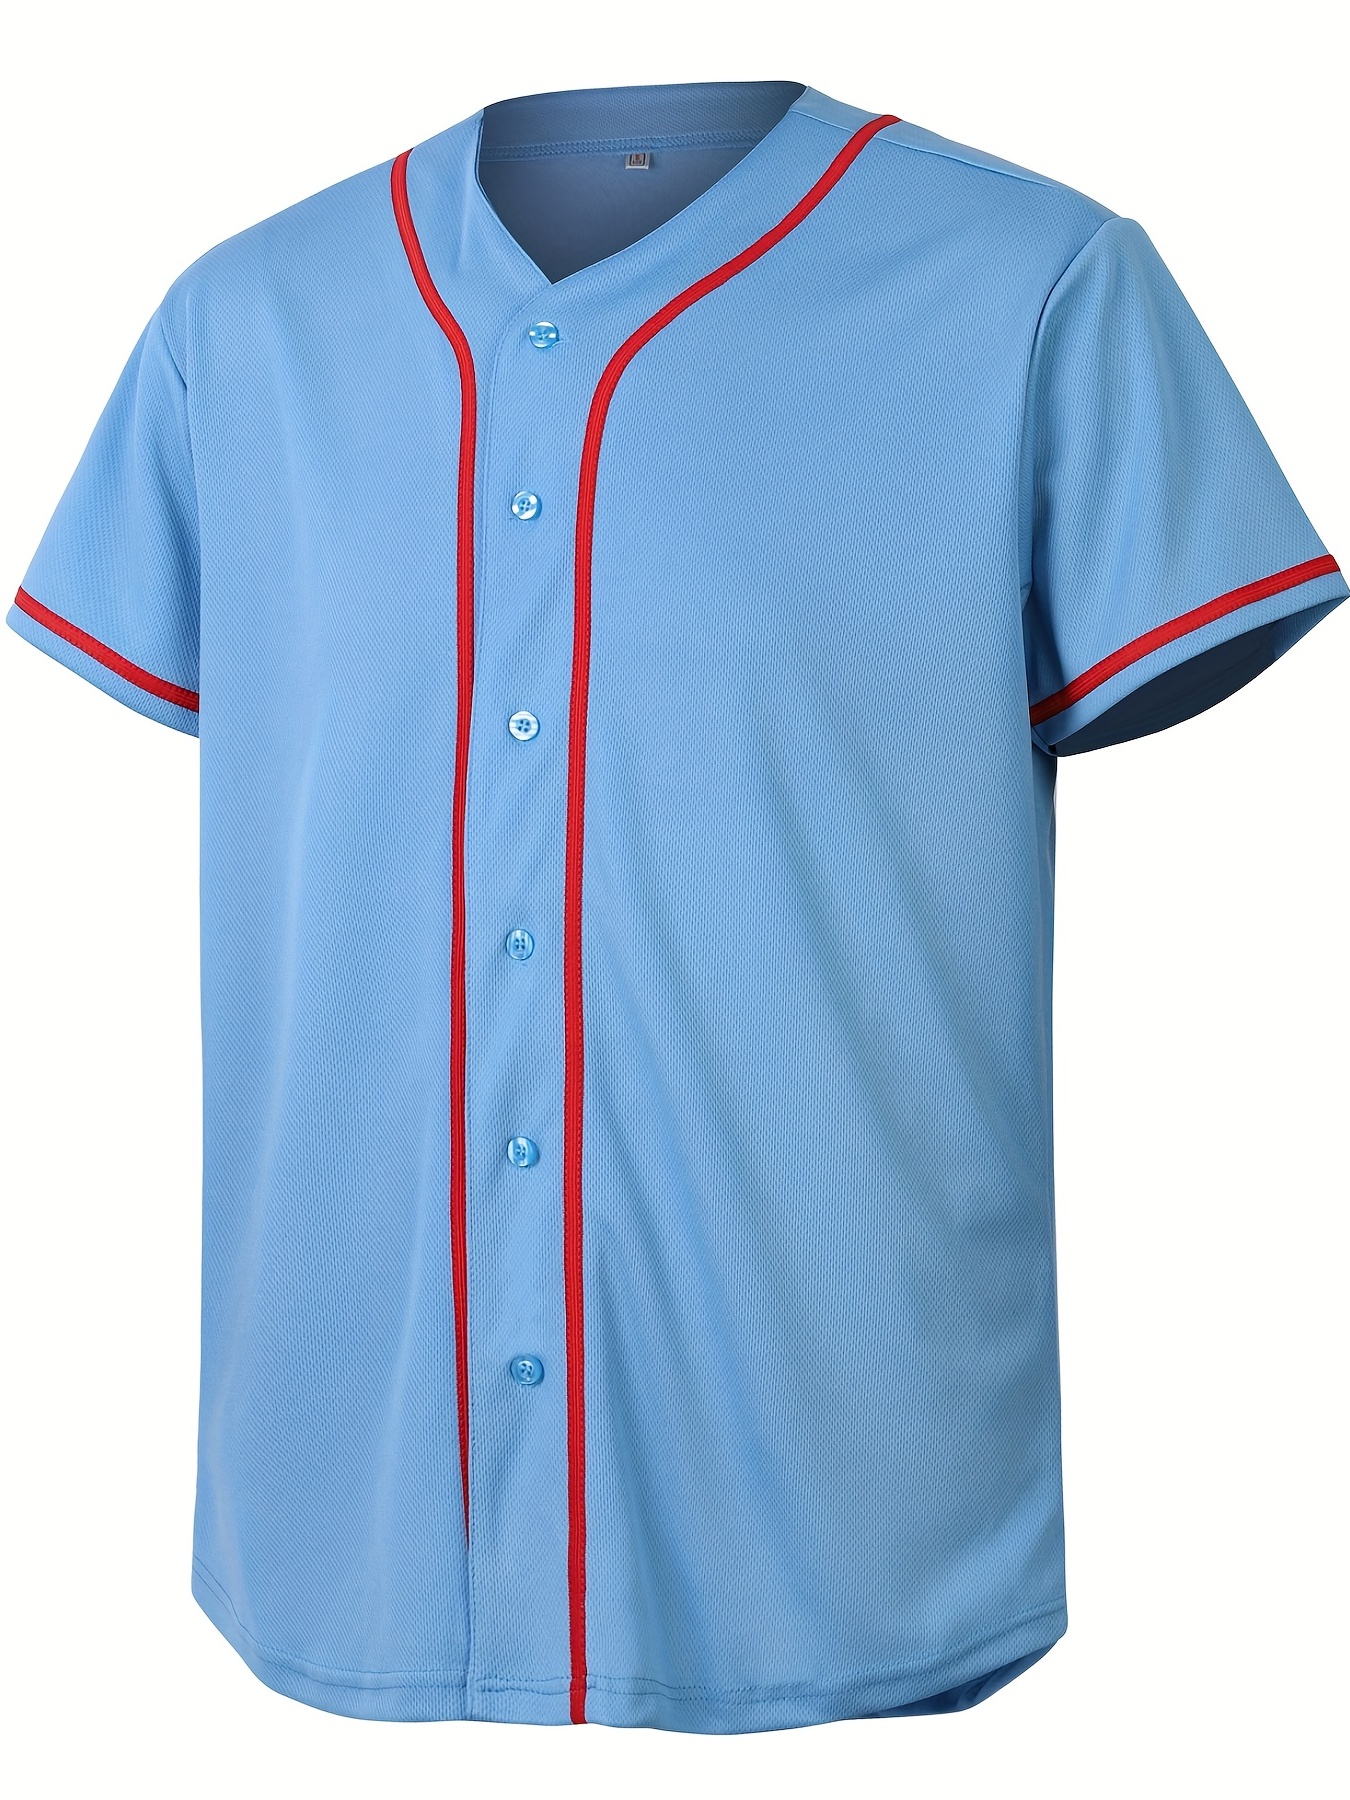 plain red and white baseball jersey